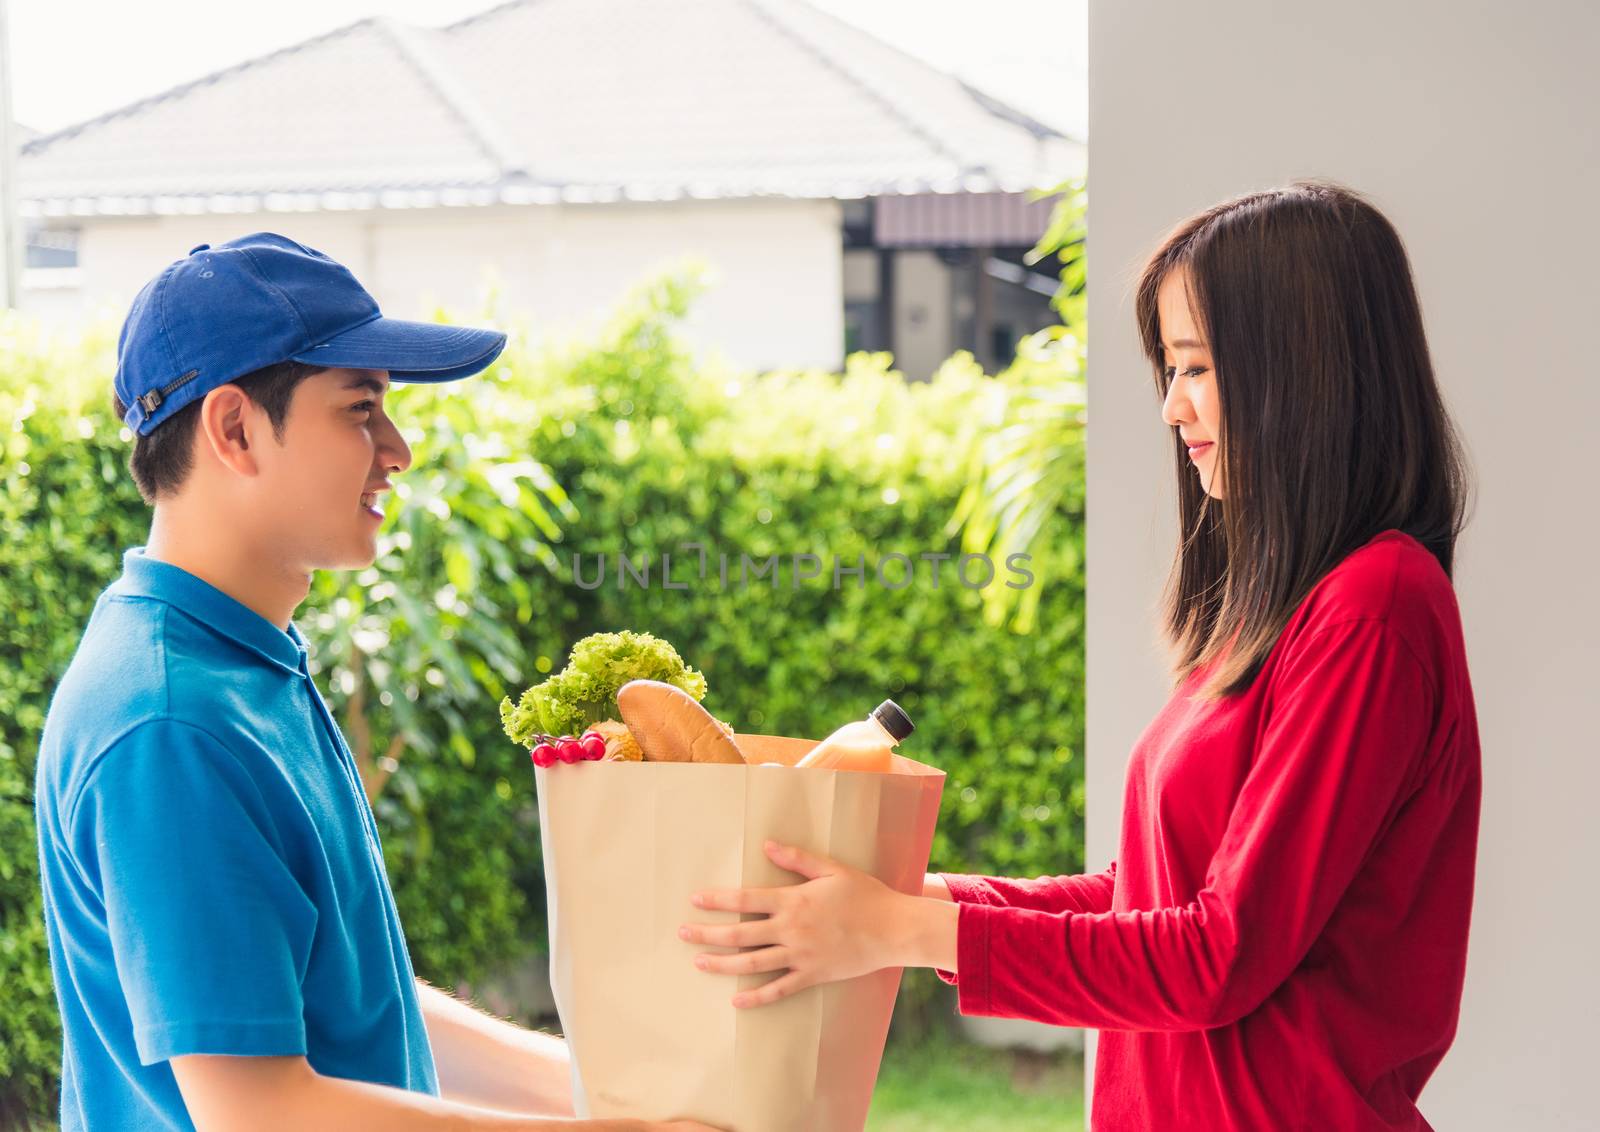 Delivery man making grocery giving fresh food to woman customer by Sorapop